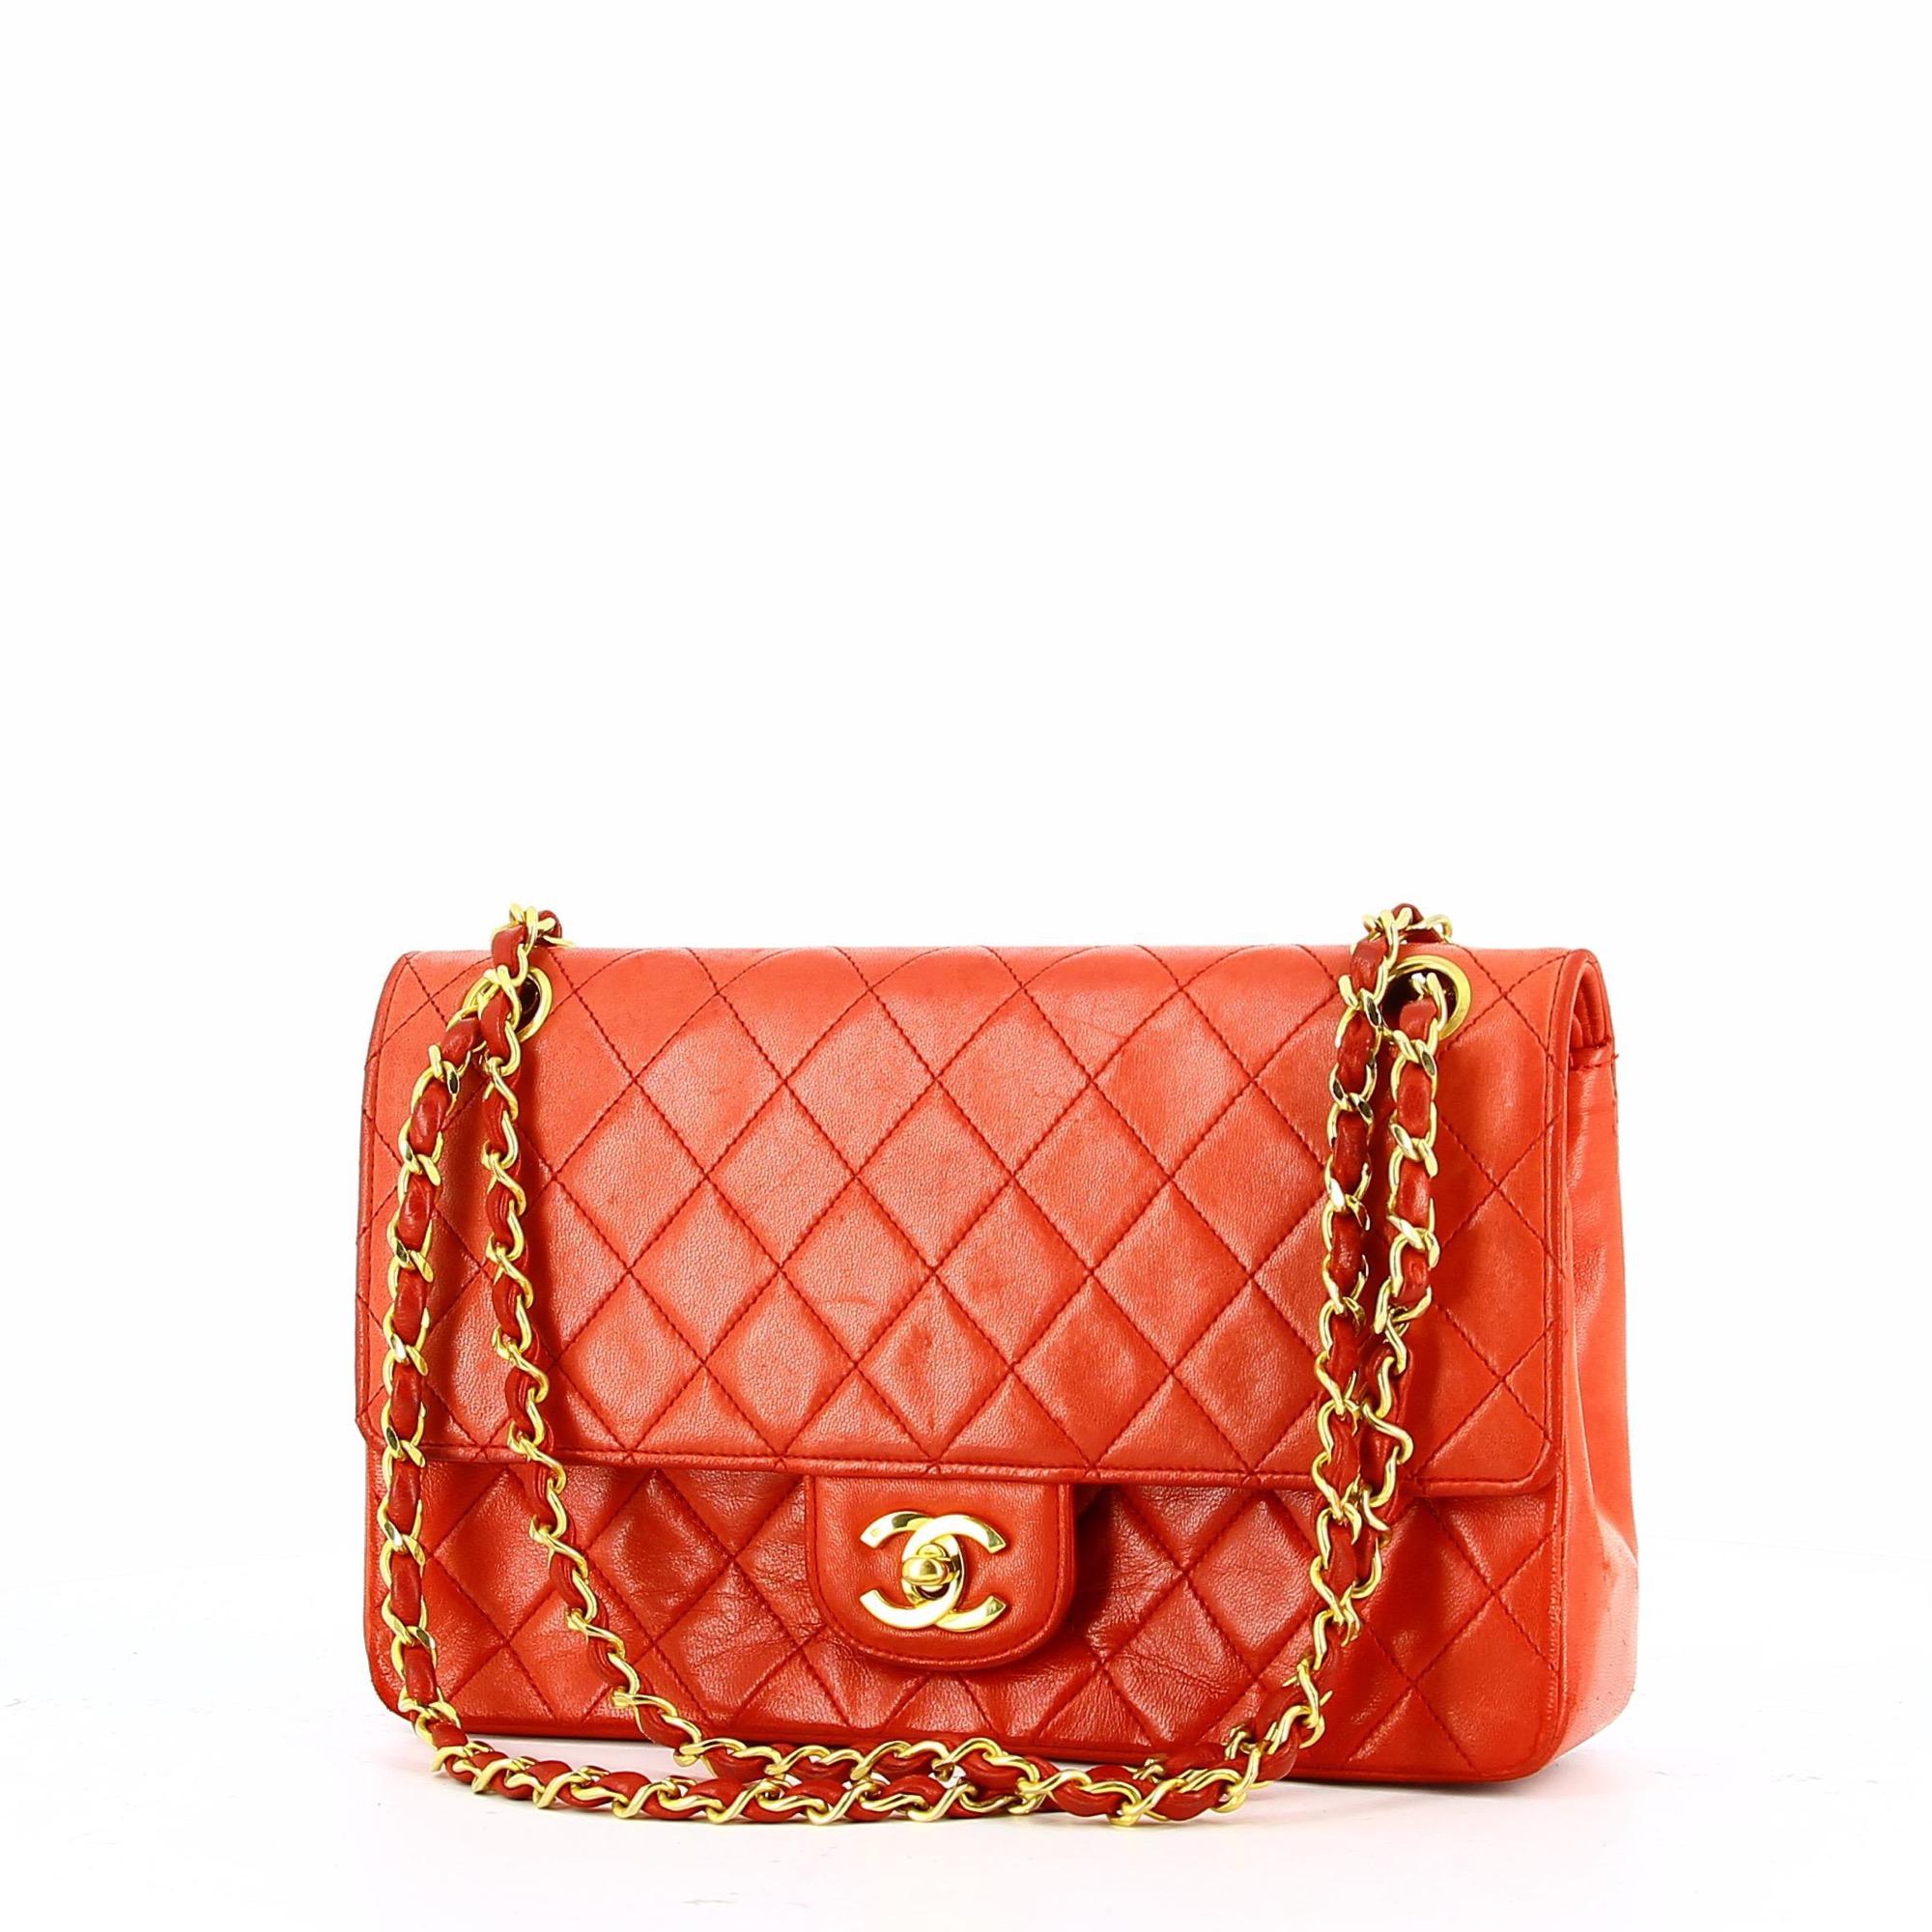 Chanel Red Timeless Bag 2